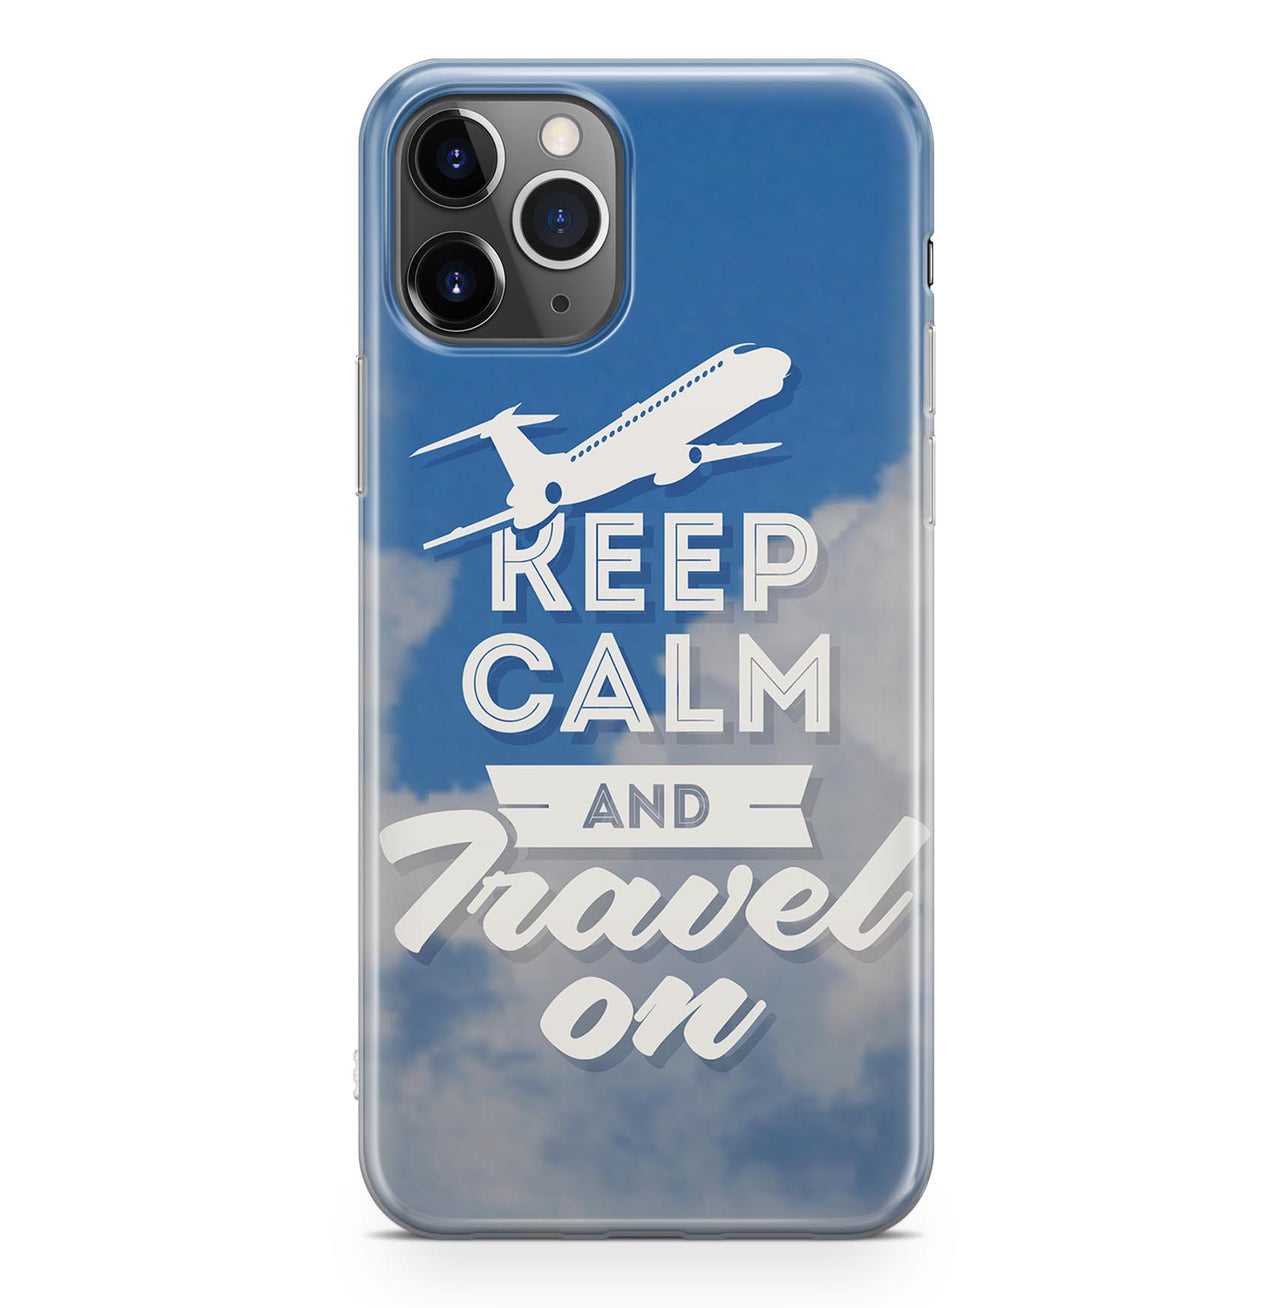 Keep Calm and Travel On Designed iPhone Cases